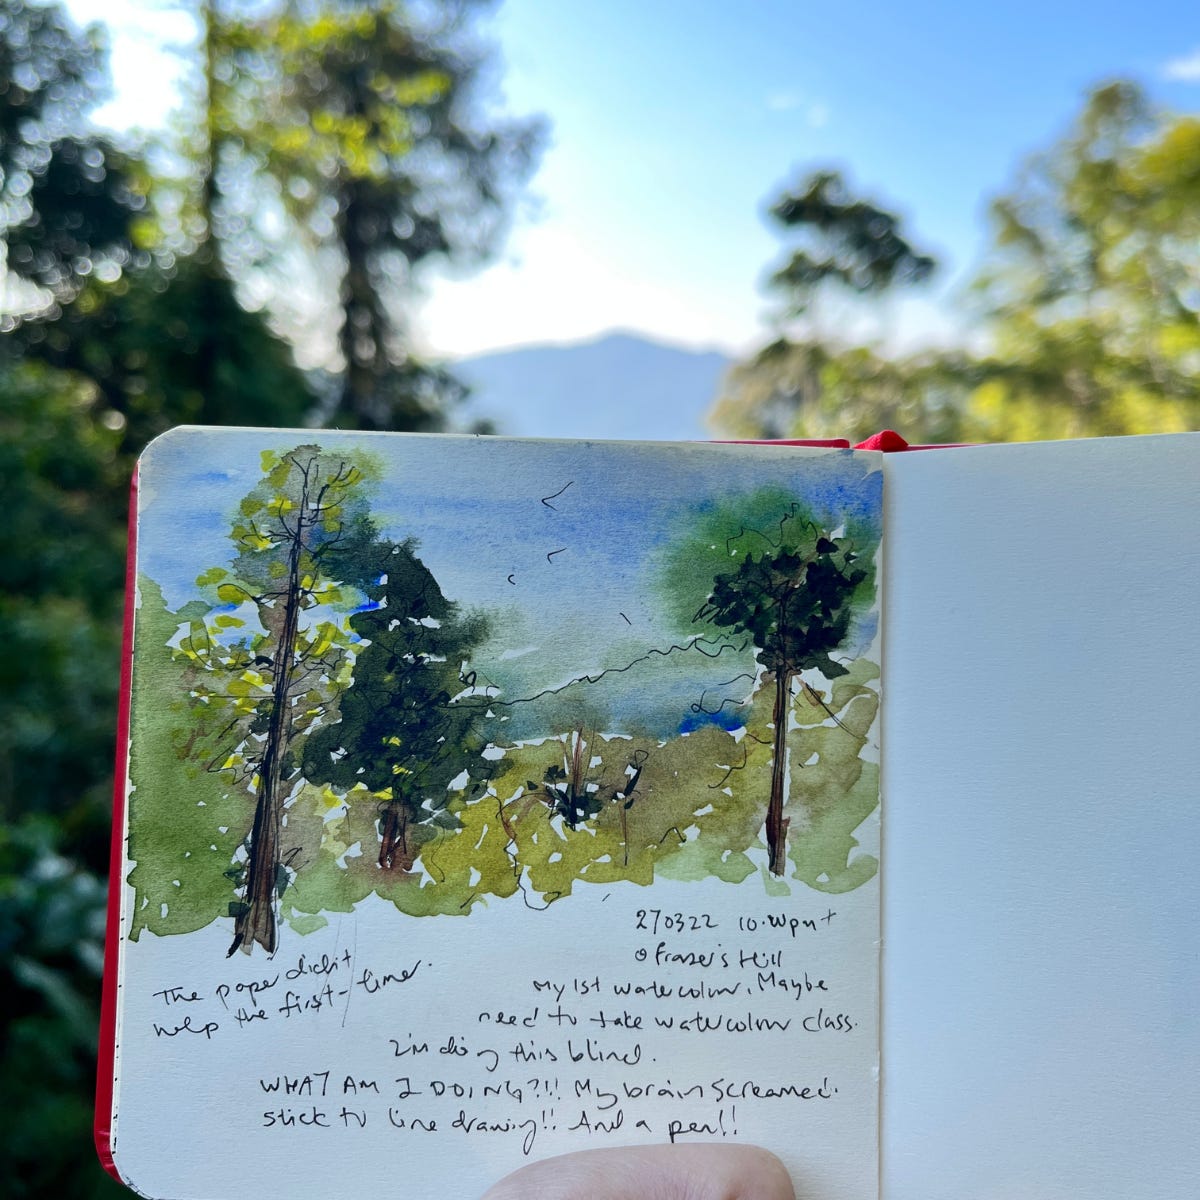 Image: a hand holding up a sketchbook against a landscape backdrop. The watercolour sketch was inspired by the landscape of turquoise blue sky, a greenish, greyish mountain range in the distant background, and surrounded by trees in different hues of greens in the middle ground. 